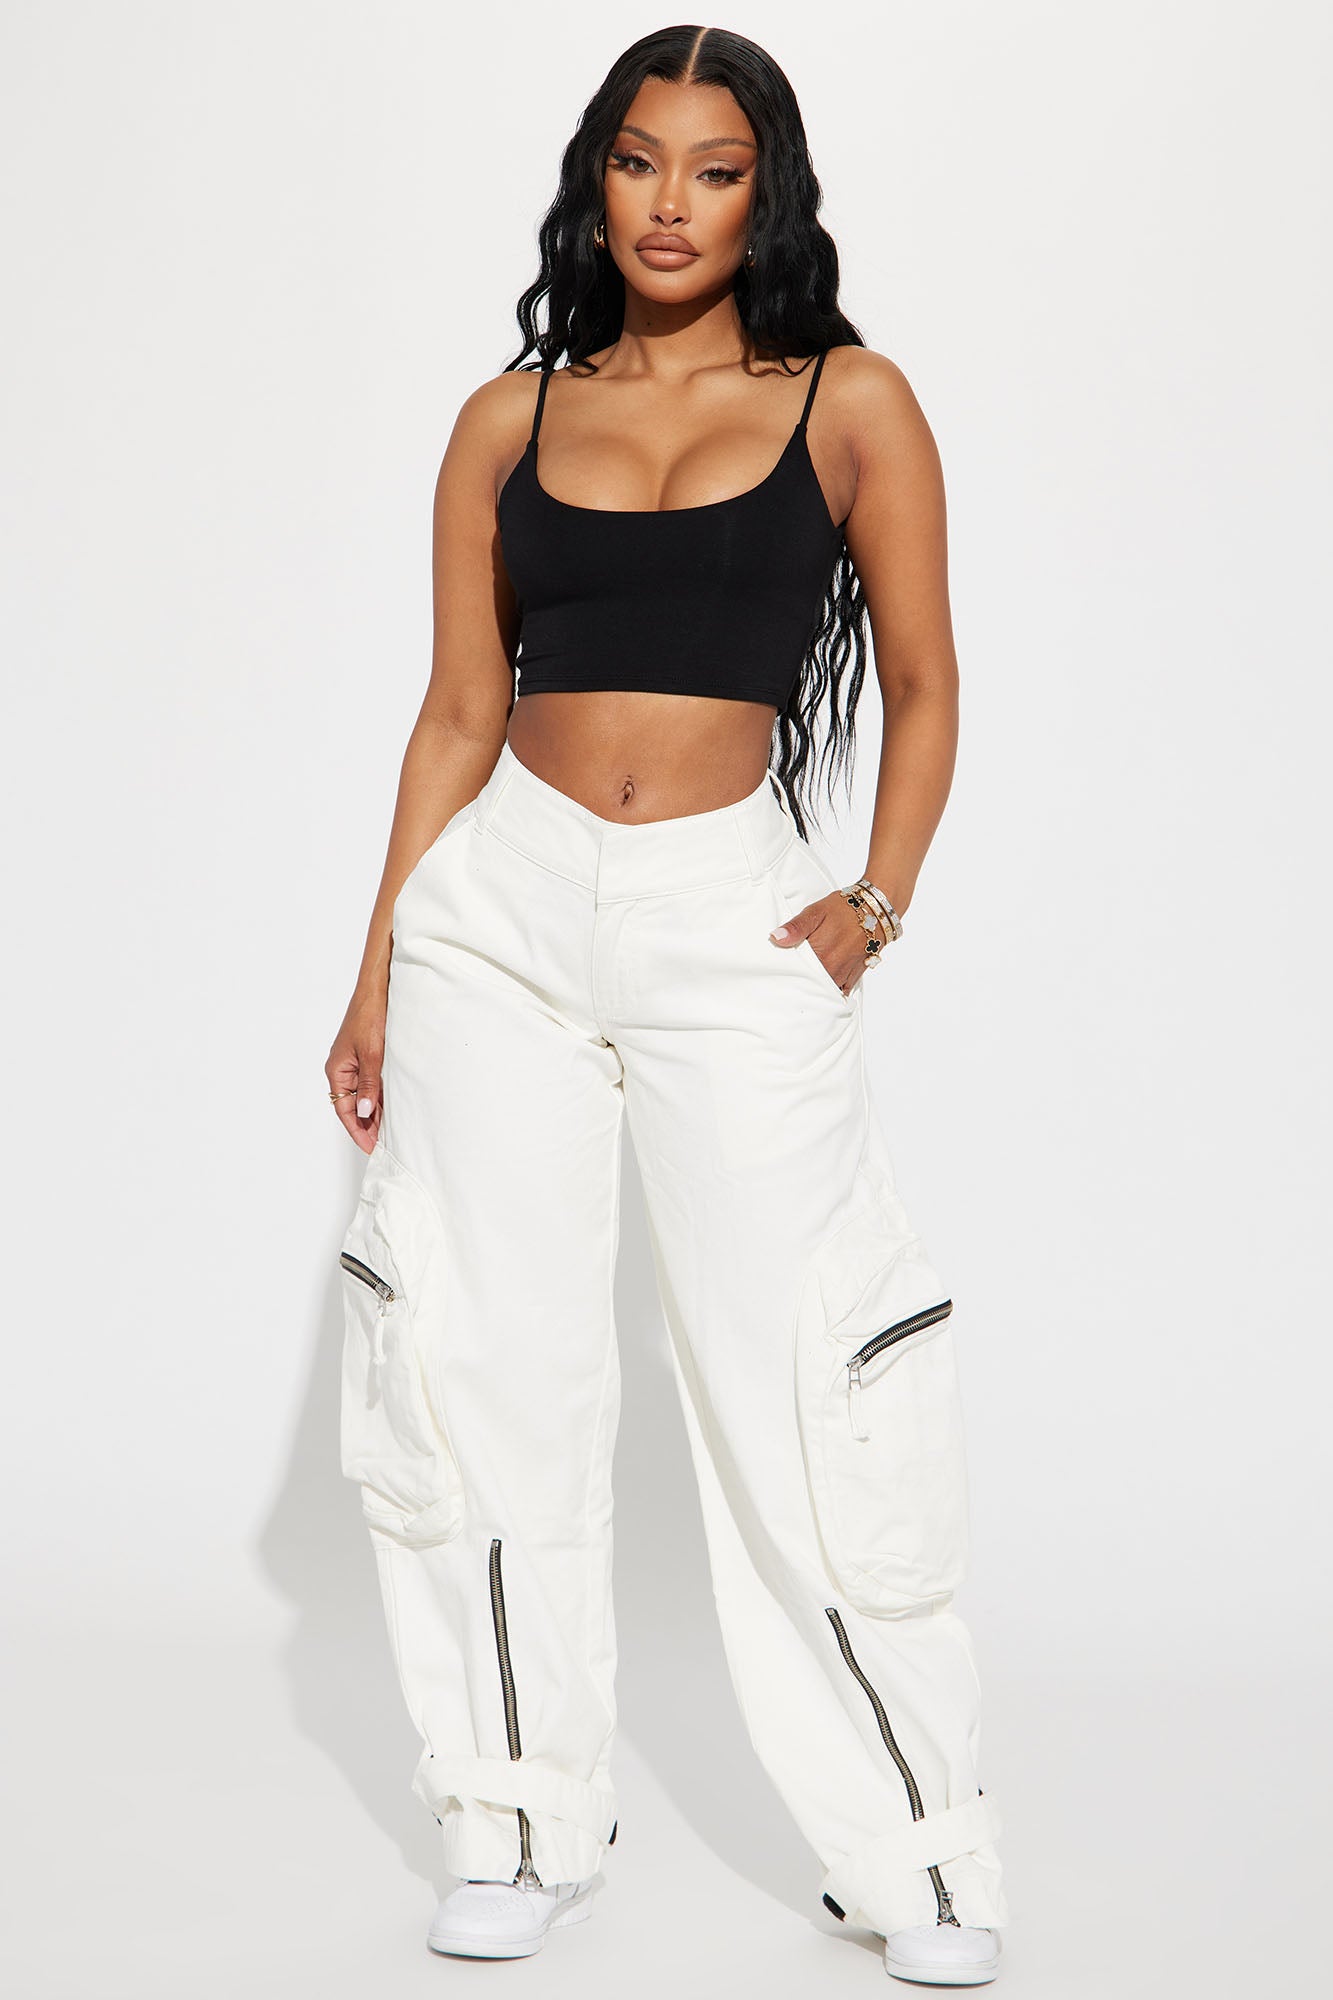 Ryder Baggy Pants White